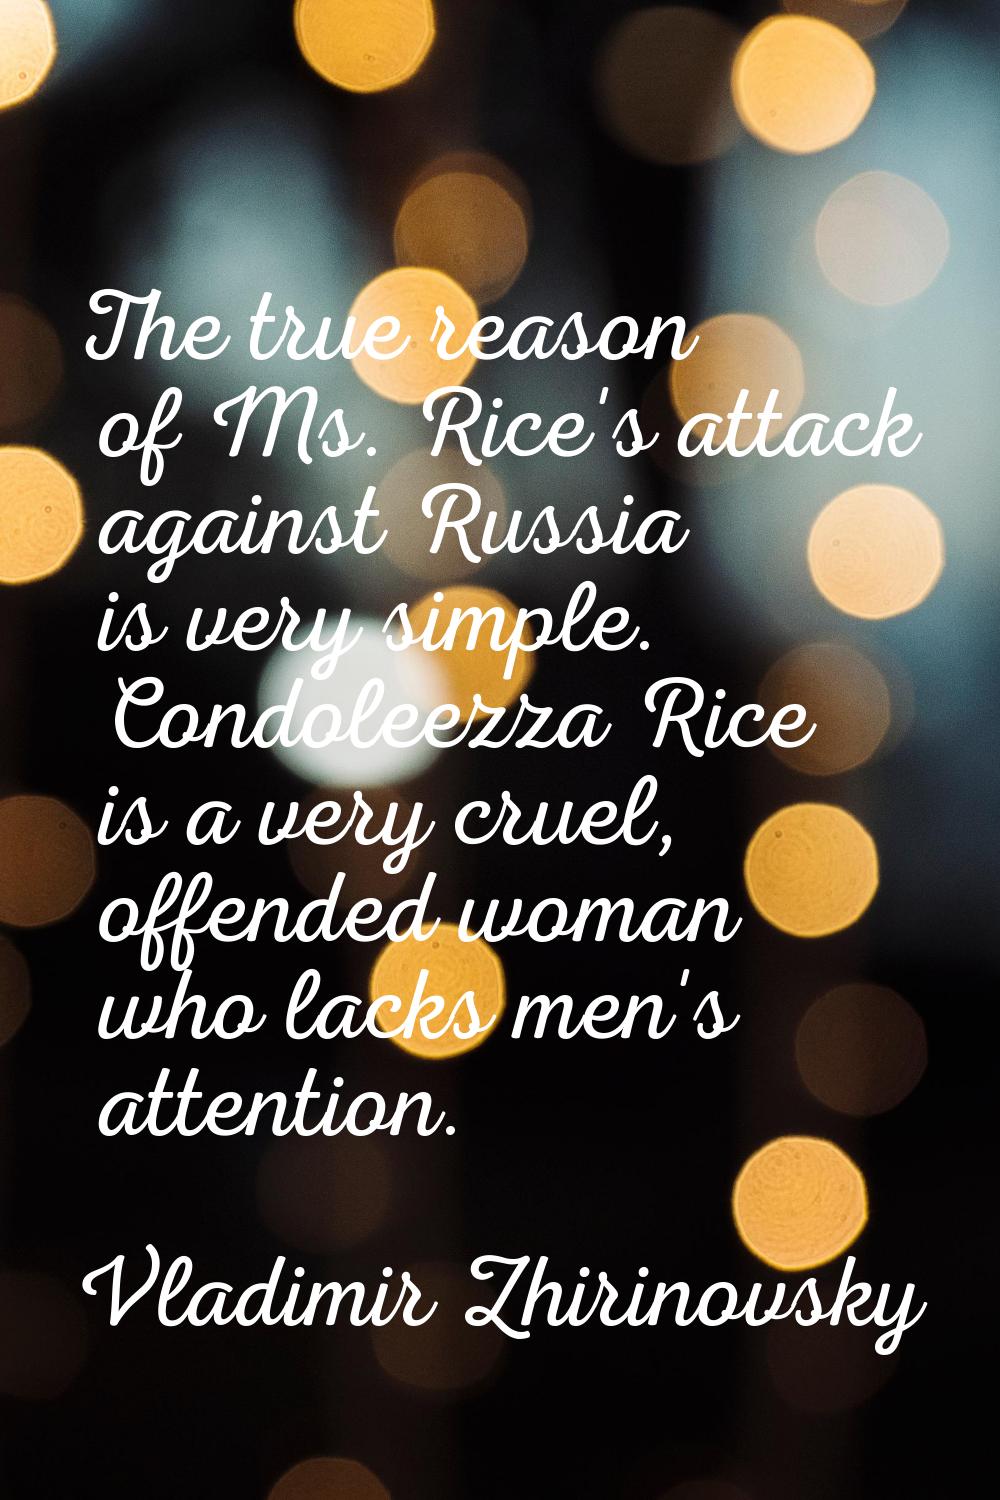 The true reason of Ms. Rice's attack against Russia is very simple. Condoleezza Rice is a very crue